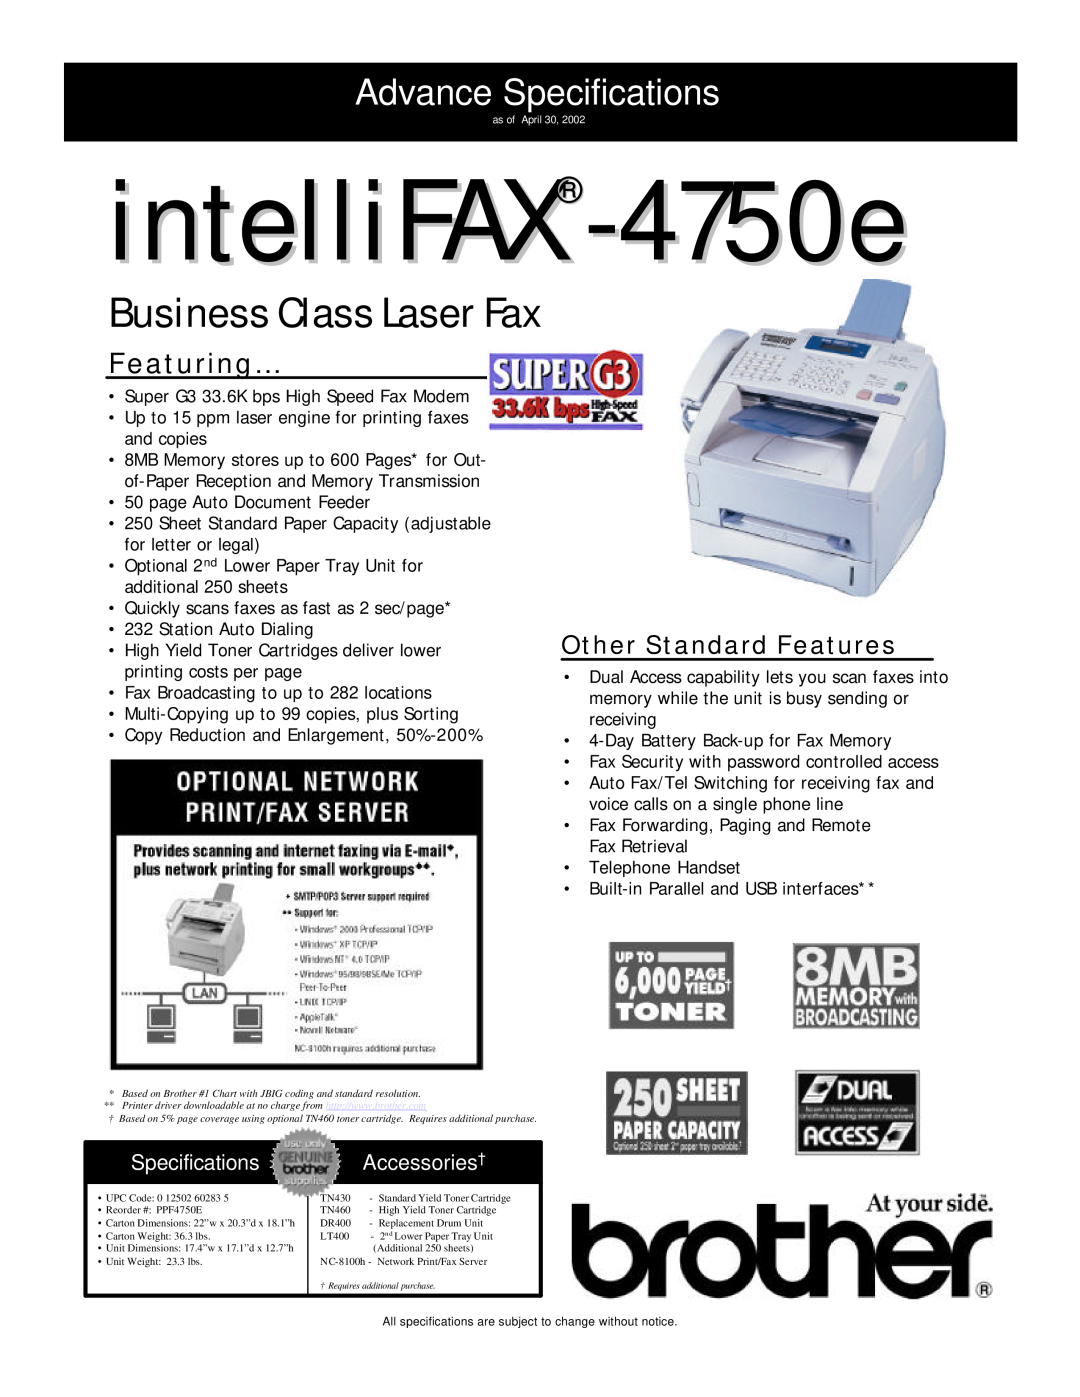 Brother specifications intelliFAX-4750e, Business Class Laser Fax, Advance Specifications, Featuring…, Accessories† 